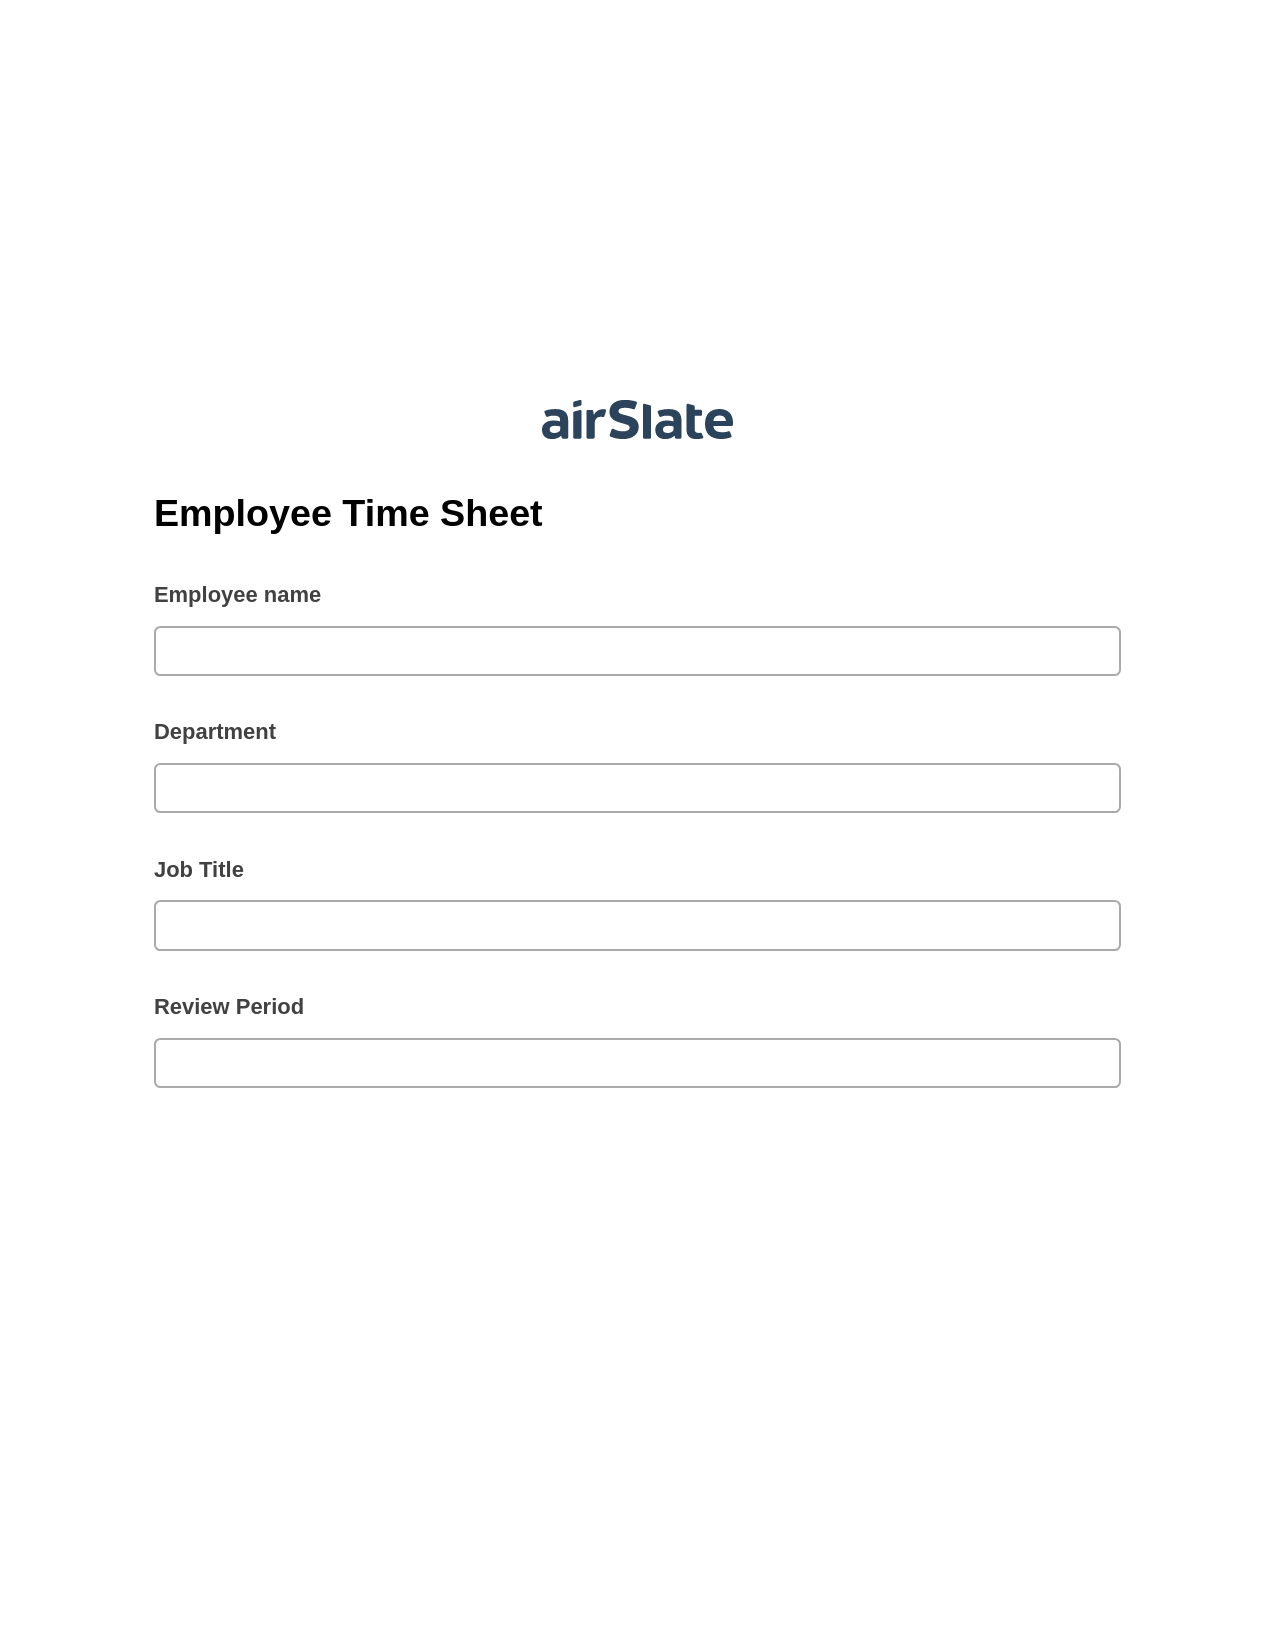 Employee Time Sheet Pre-fill from another Slate Bot, Create slate addon, Archive to Dropbox Bot